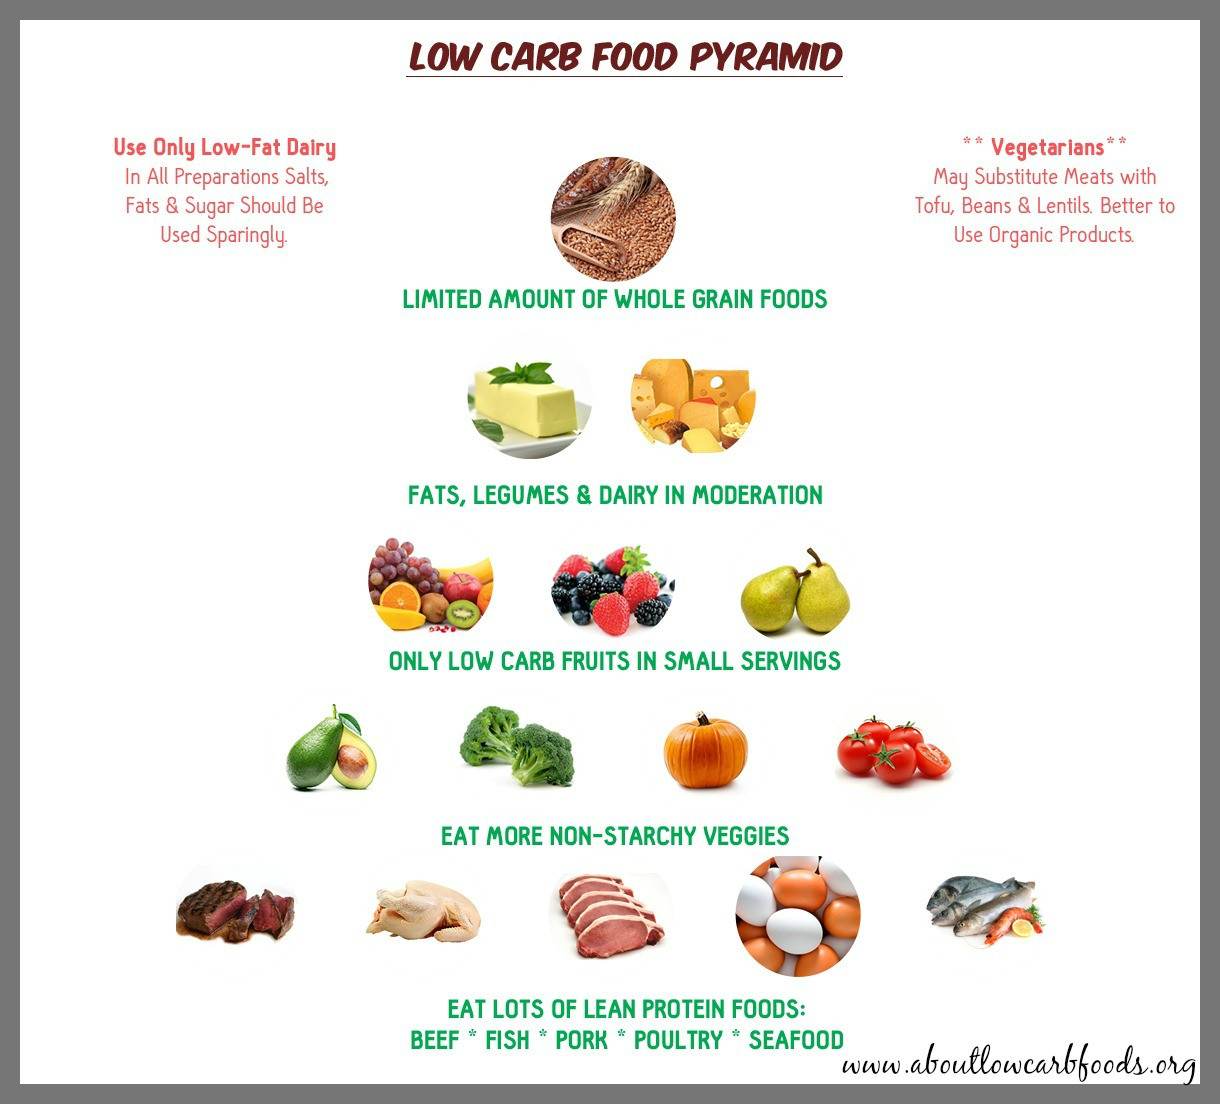 Foods To Avoid On Low Carb Diet
 Healthy Foods to Eat on a Low Carb Diet About Low Carb Foods